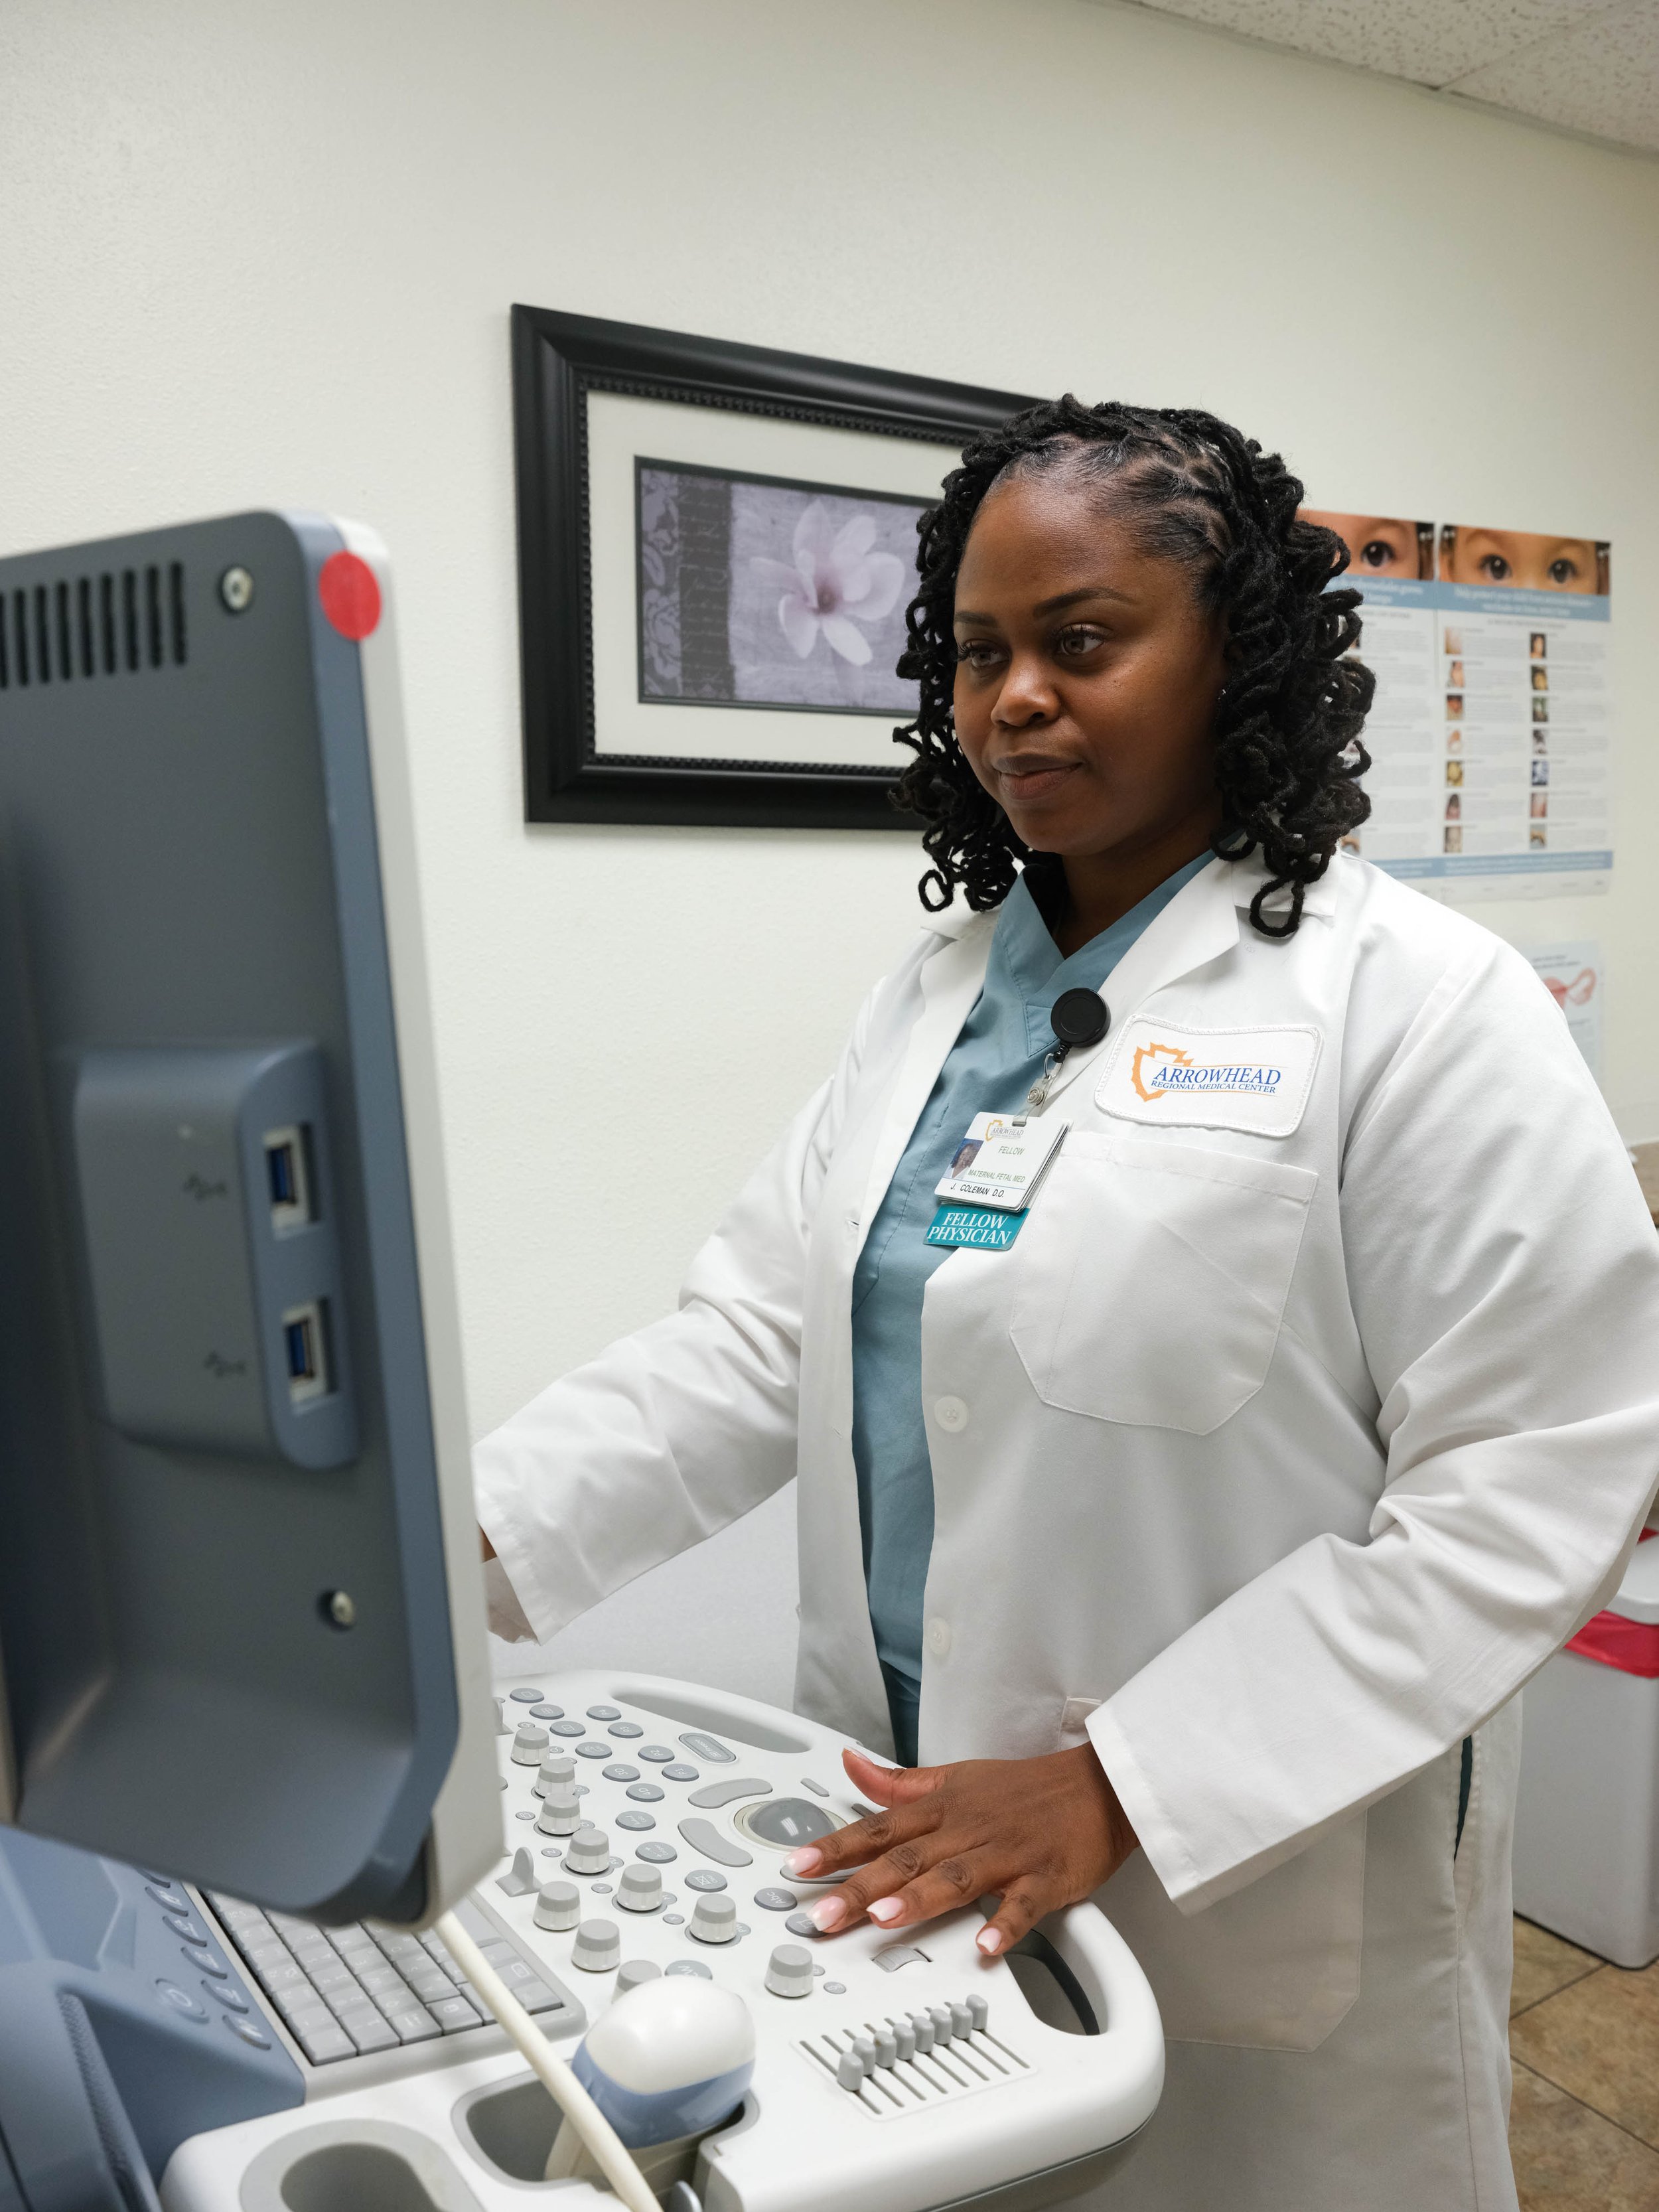  Dr. Coleman works the computer that she uses to perform patient ultrasounds on February 2, 2022.  Coleman is an Obstetrician and is currently training as a fellow at Arrowhead Regional Medical Center to become a high risk specialist. Her experience 